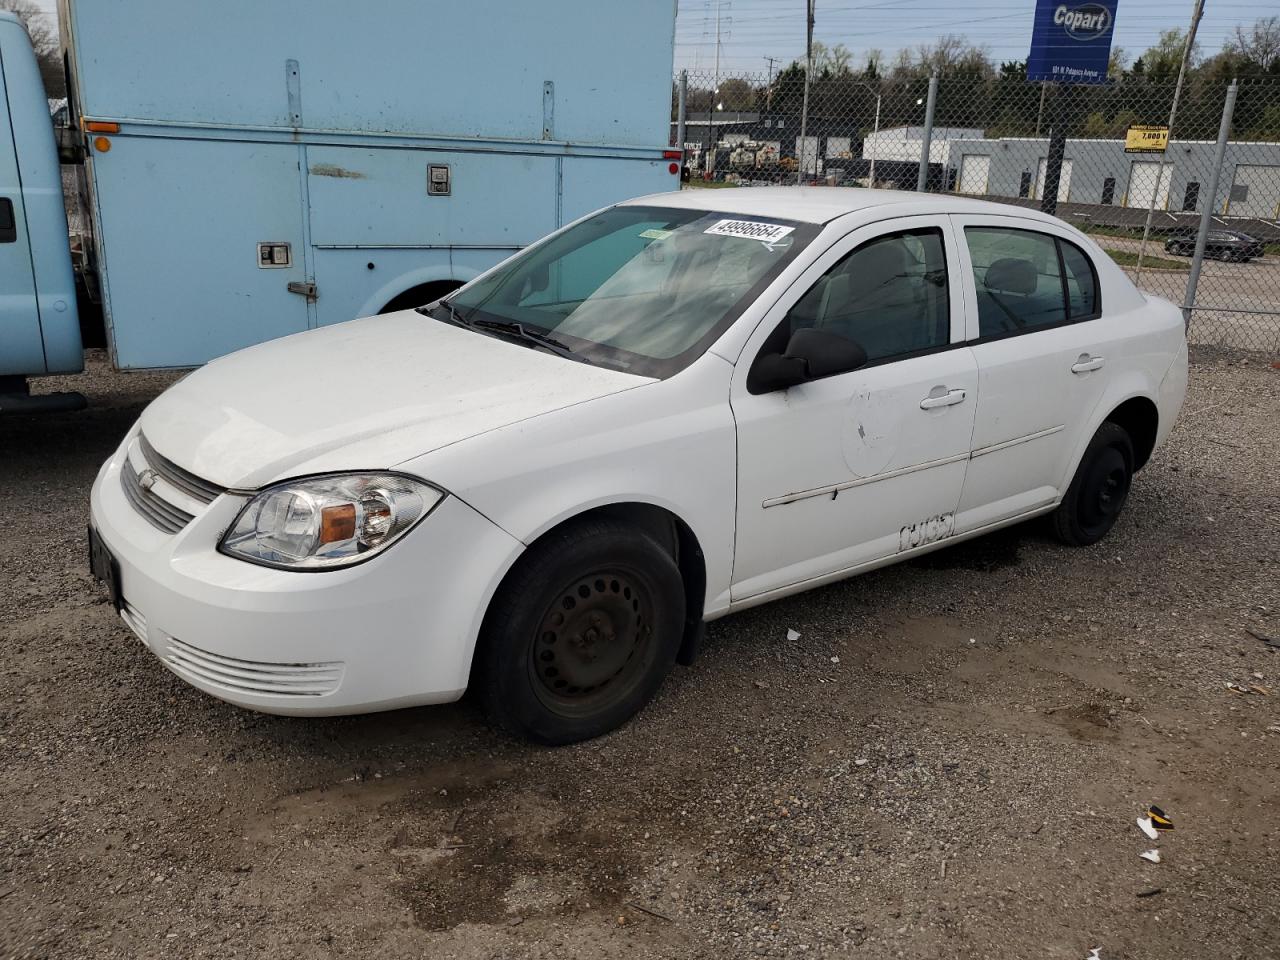 vin: 1G1AK55F787278446 1G1AK55F787278446 2008 chevrolet cobalt 2200 for Sale in 21225, Md - Baltimore East, Baltimore, Maryland, USA